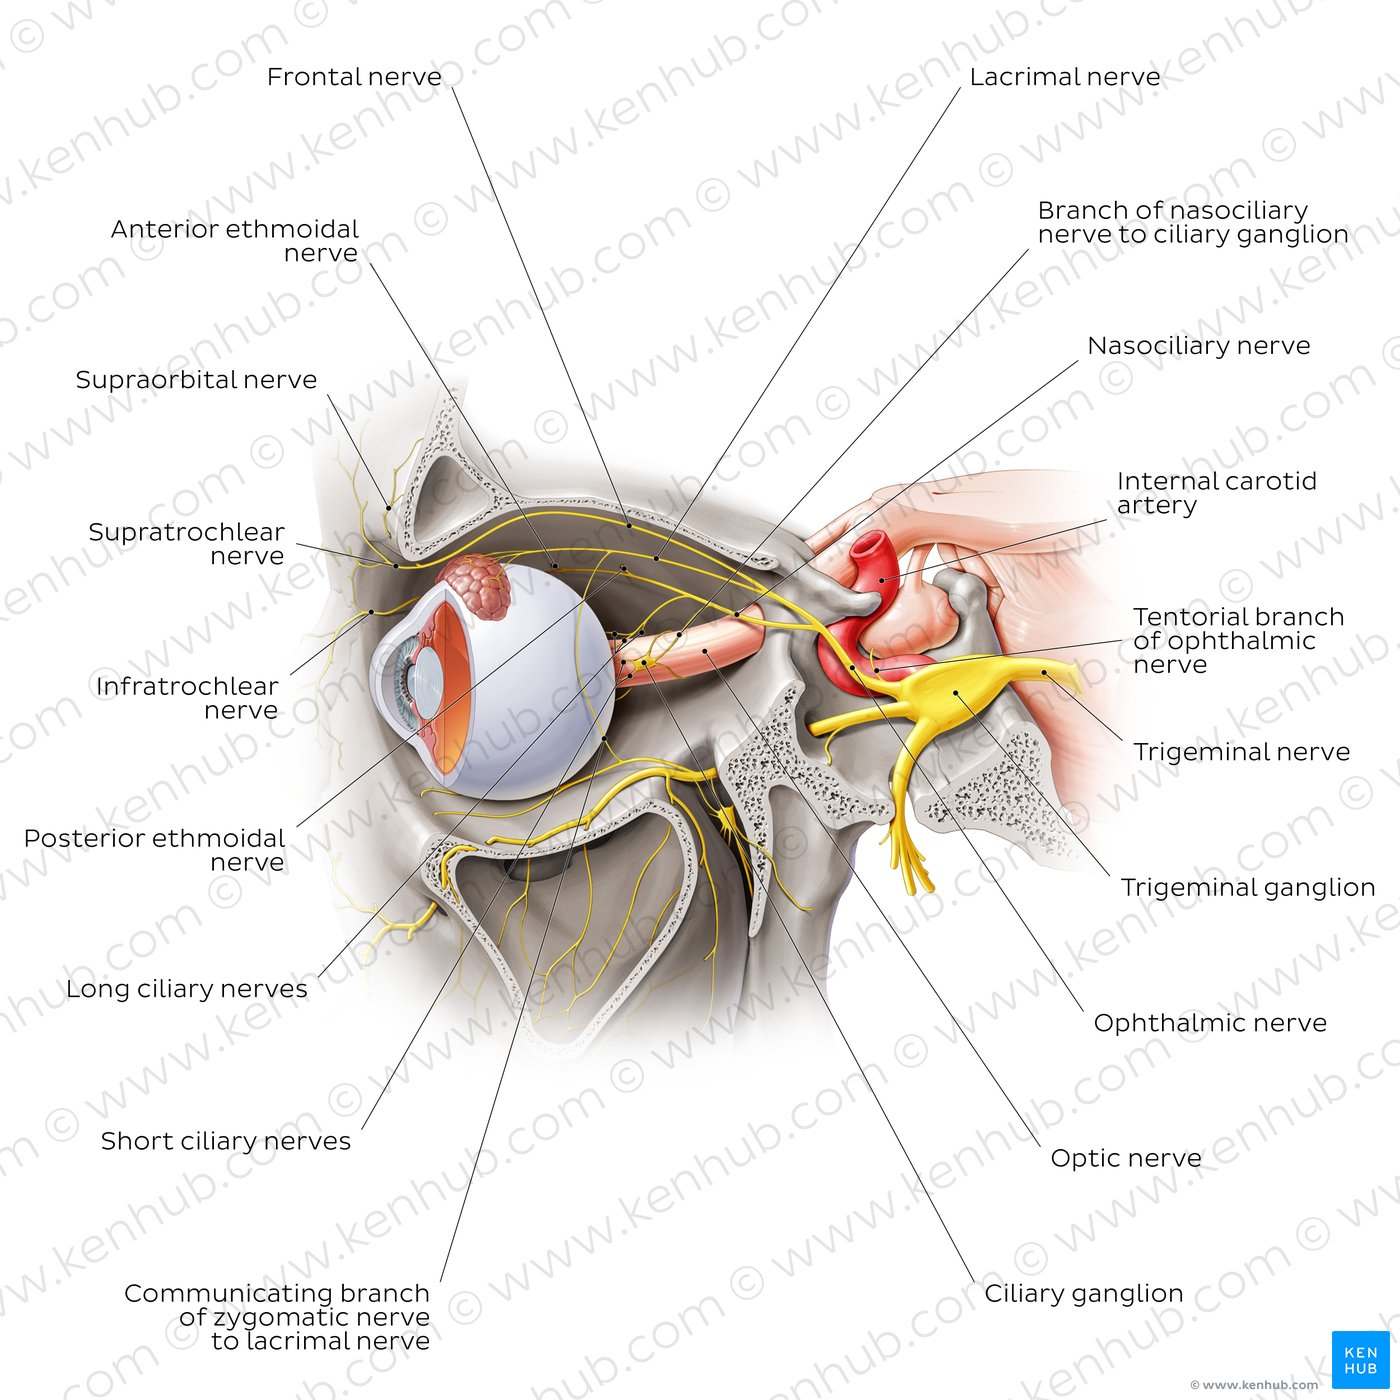 Ophthalmic nerve